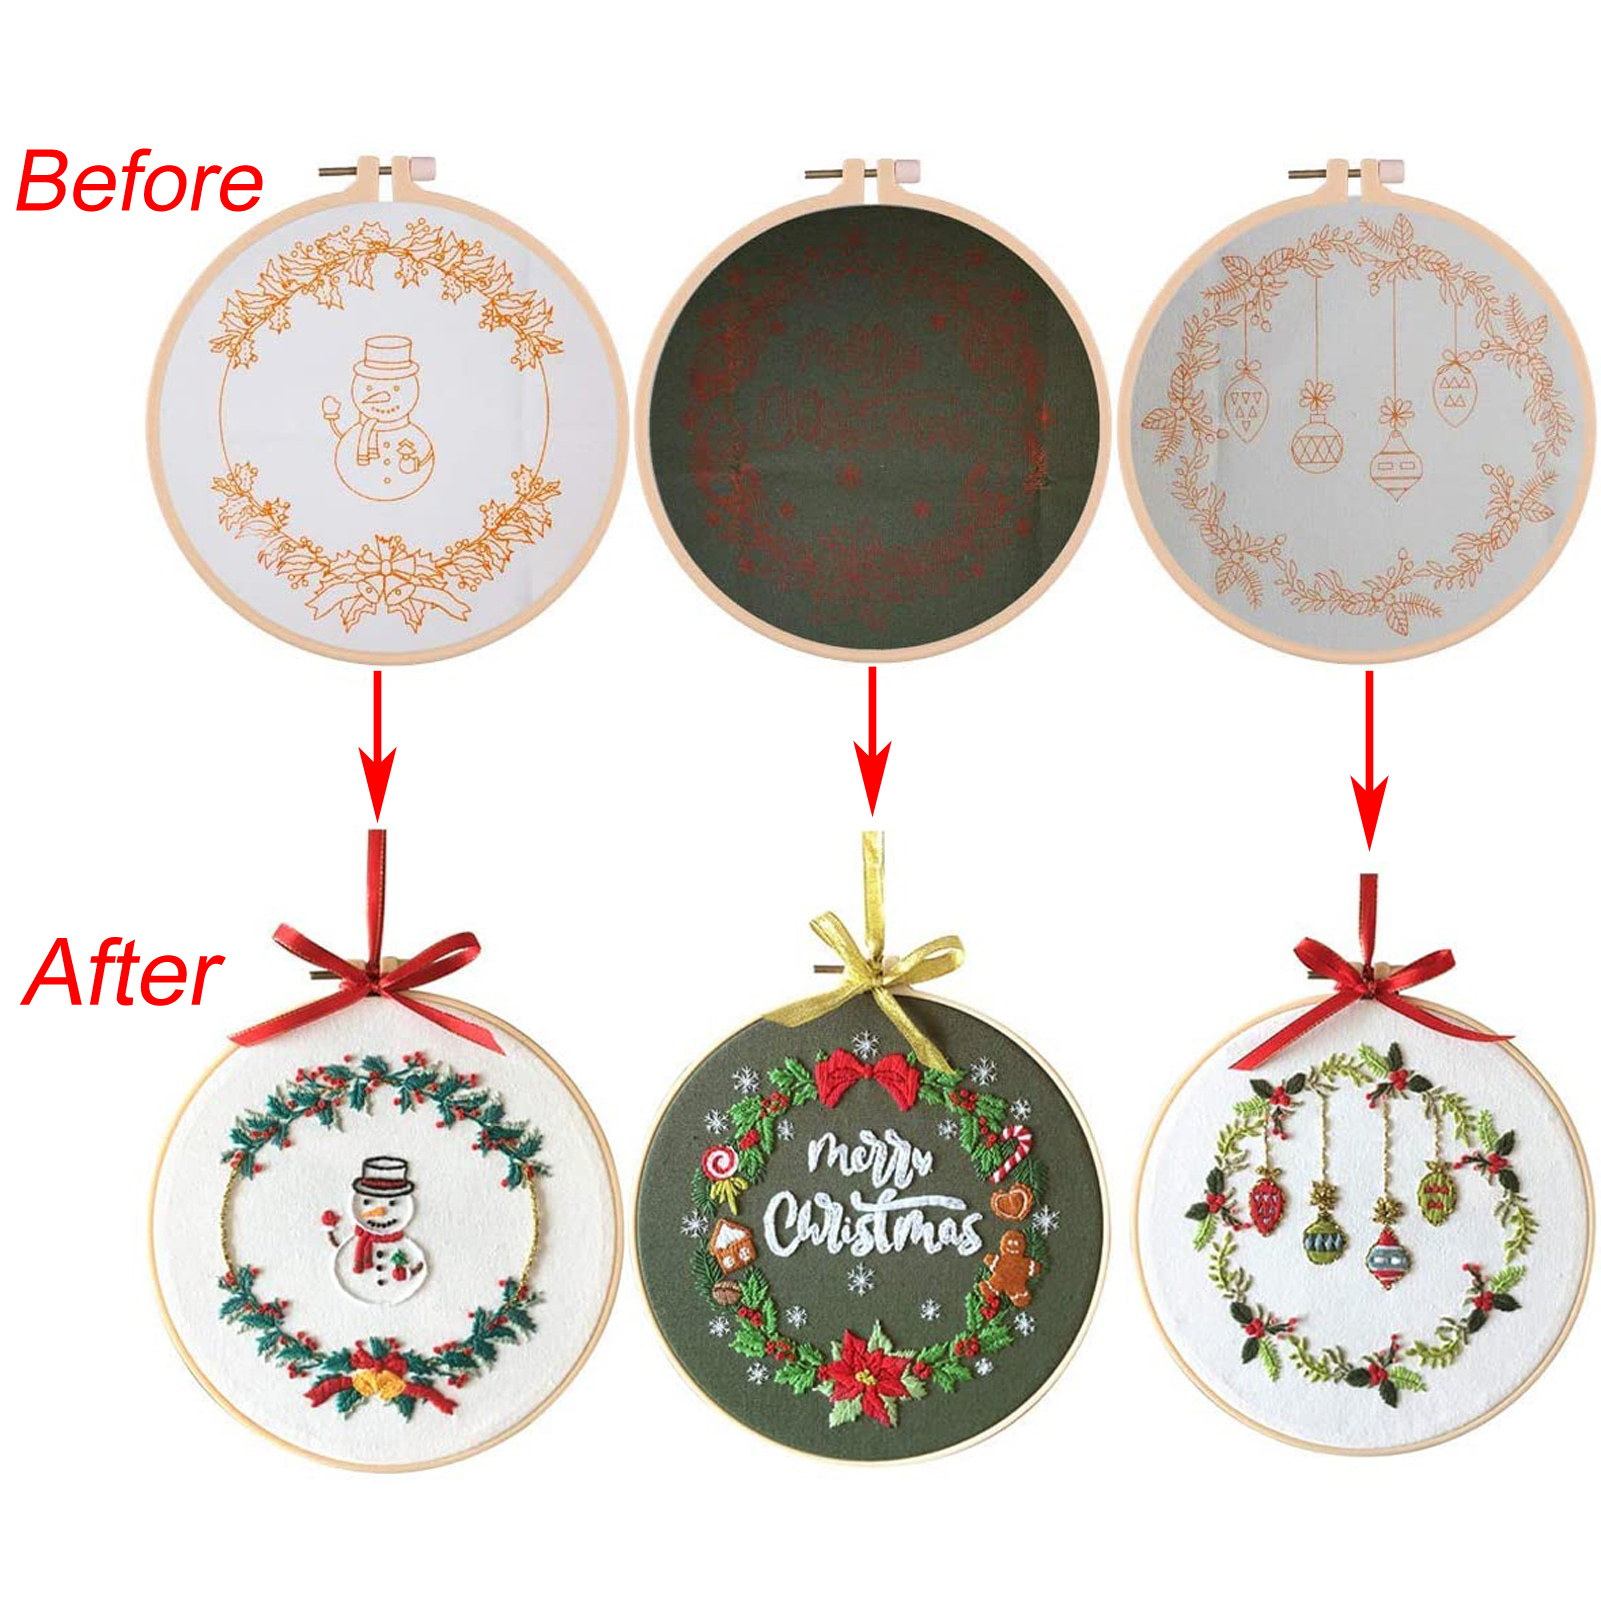 9 Sets Christmas Cross Stitch Beginners Kits for Kids with Patterns and Instructions Xmas Stamped Embroidery Kit Including Embroidery Hoops Colored Threads Needles for Adults Starters